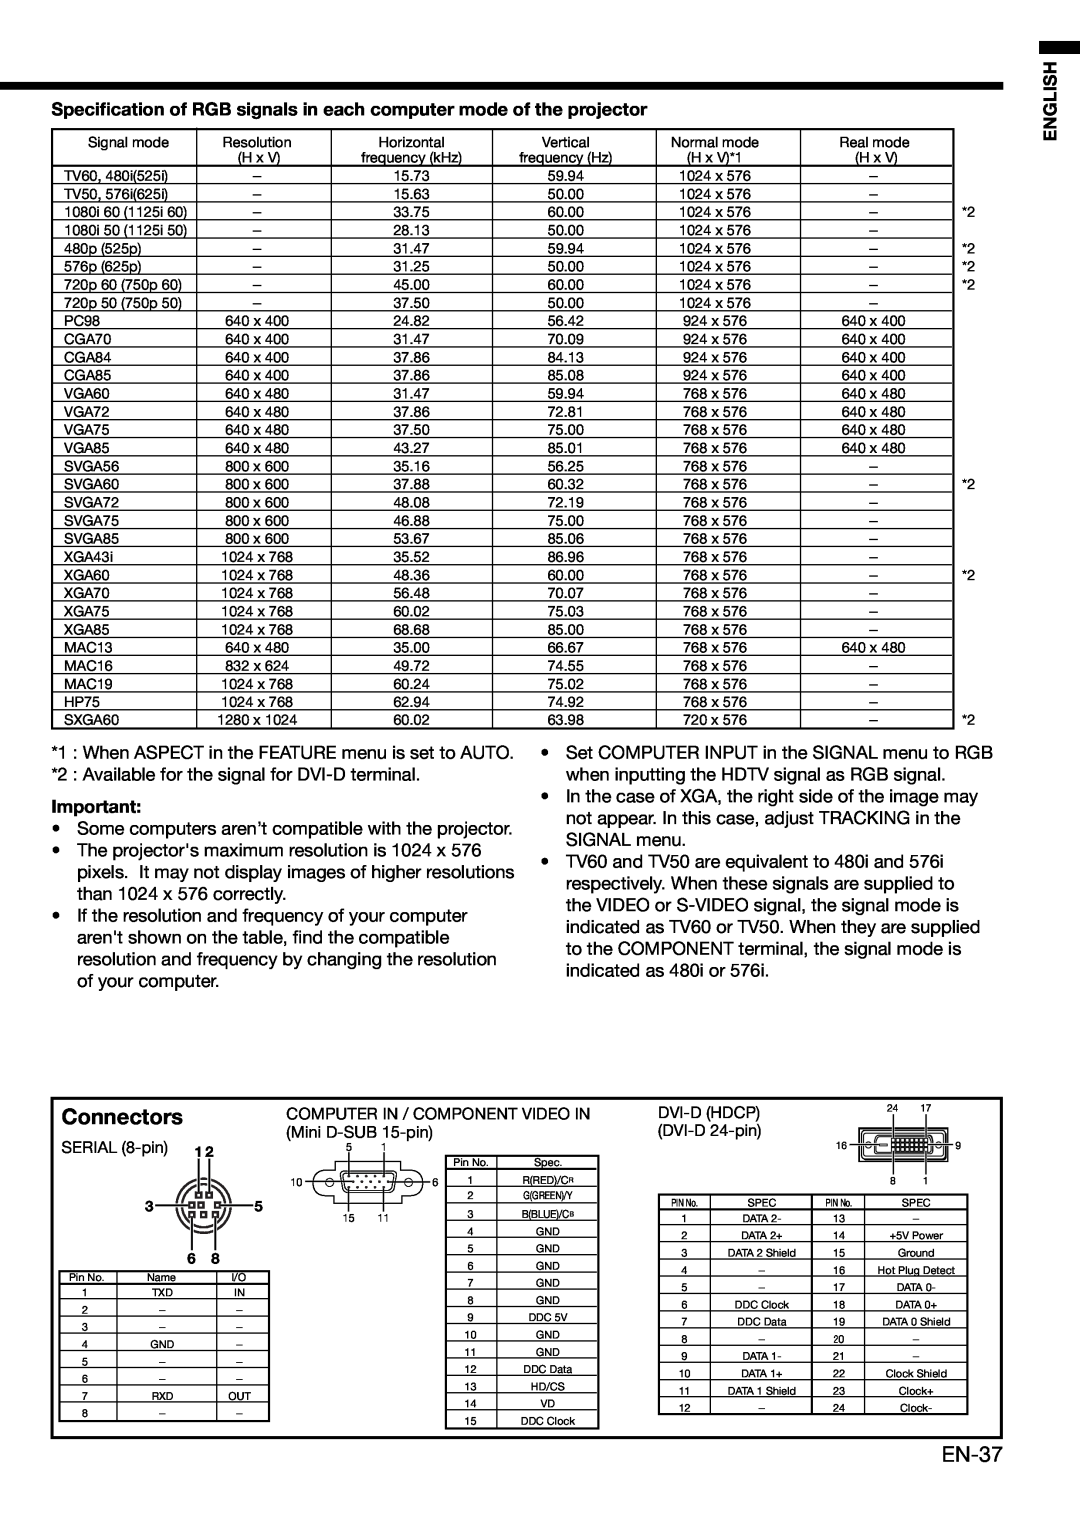 Mitsubishi Electronics HC910 Connectors, EN-37, Speciﬁcation of RGB signals in each computer mode of the projector 